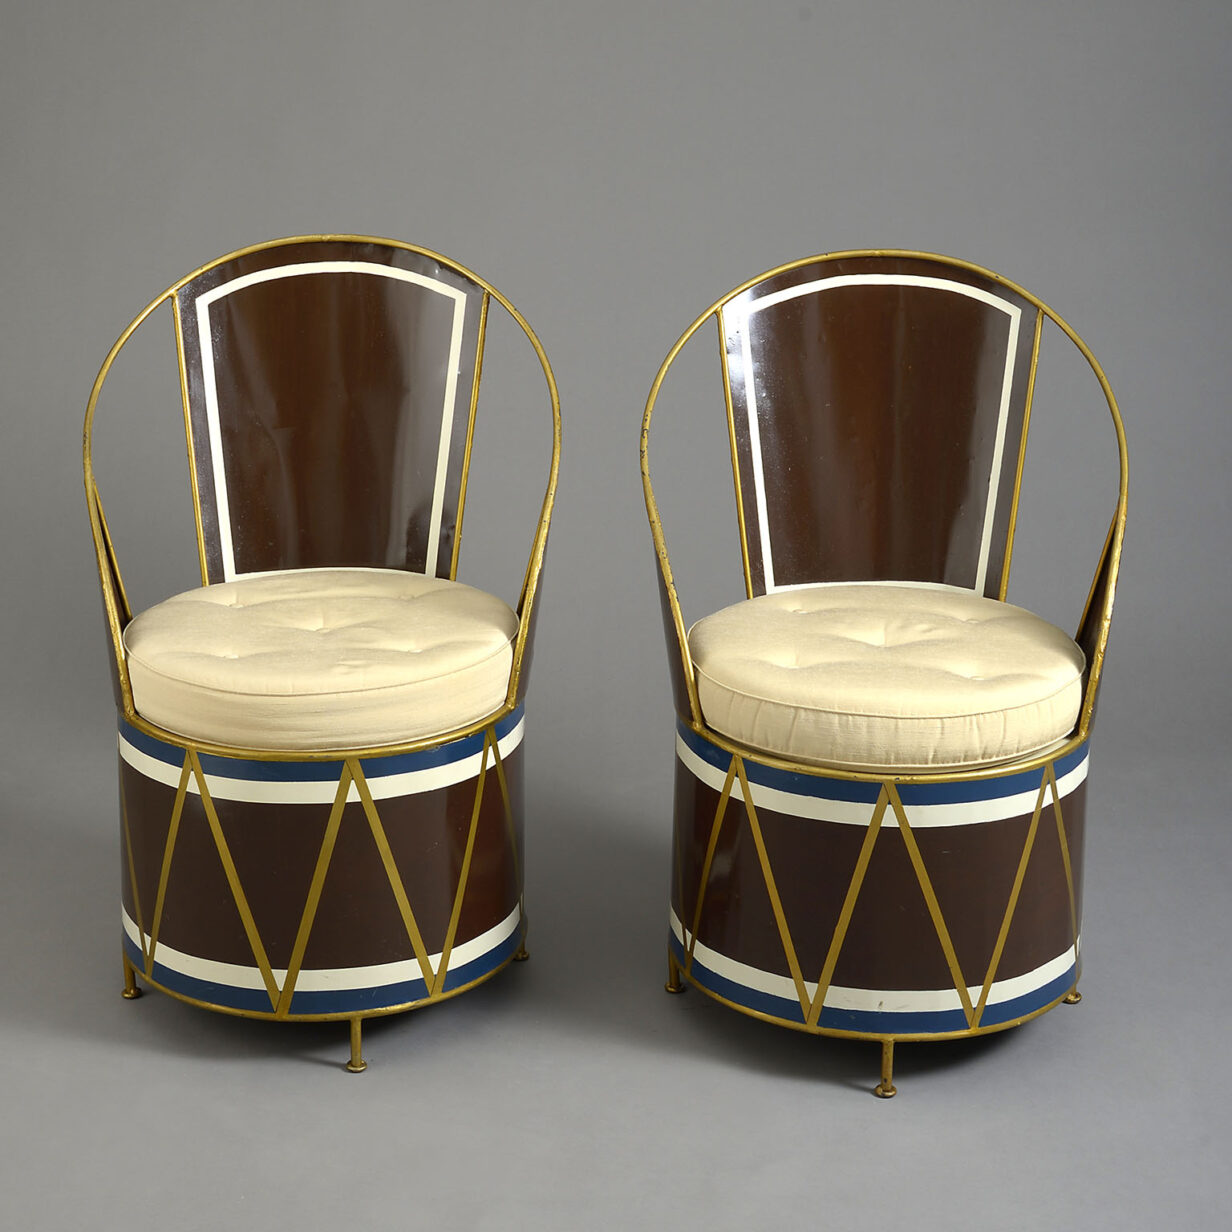 Pair of tole drum armchairs